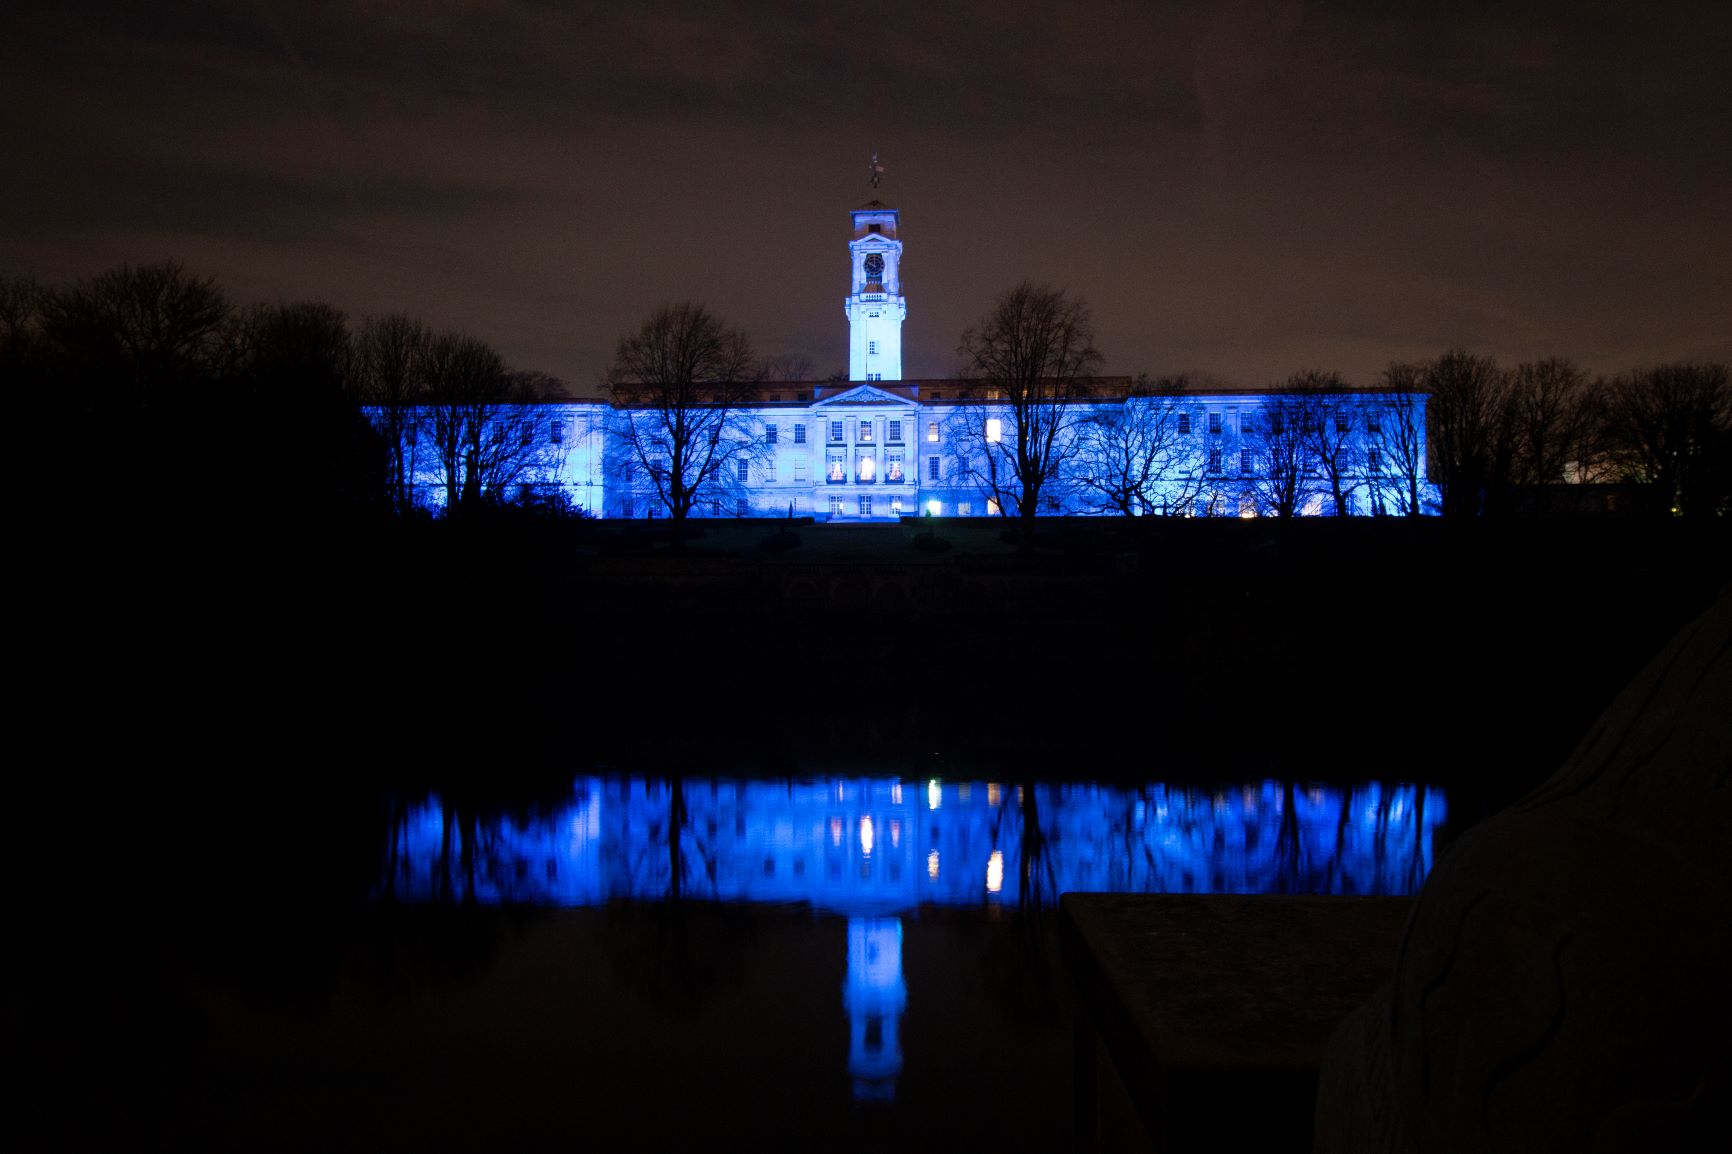 The Trent Building is lit up in blue